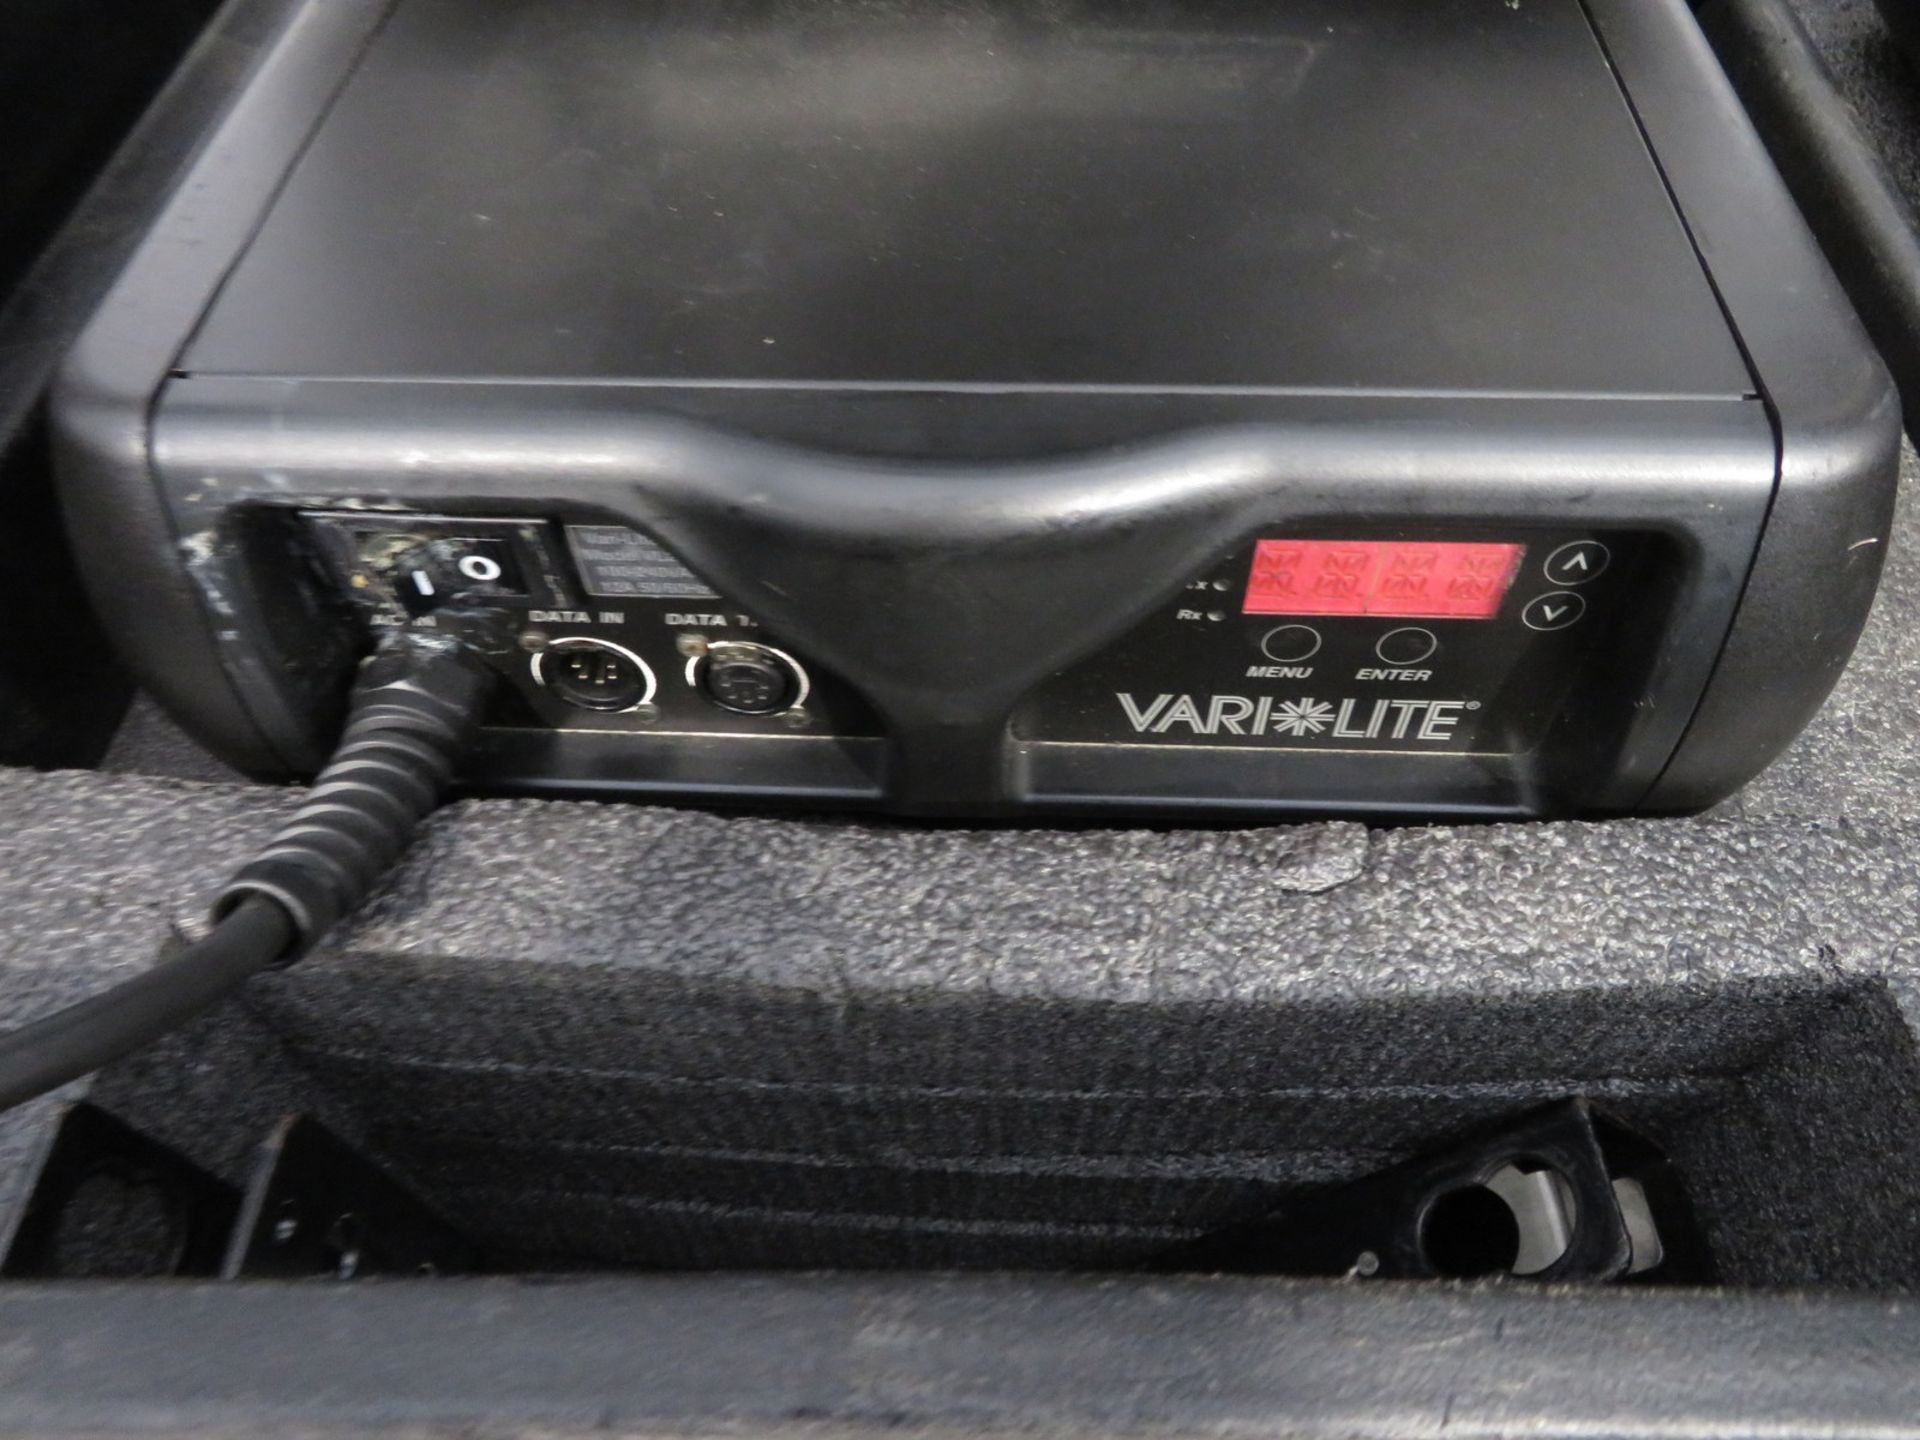 Pair of Varilite VL2402 Wash in flightcase. Includes hanging clamps and safety bonds. Work - Image 5 of 8